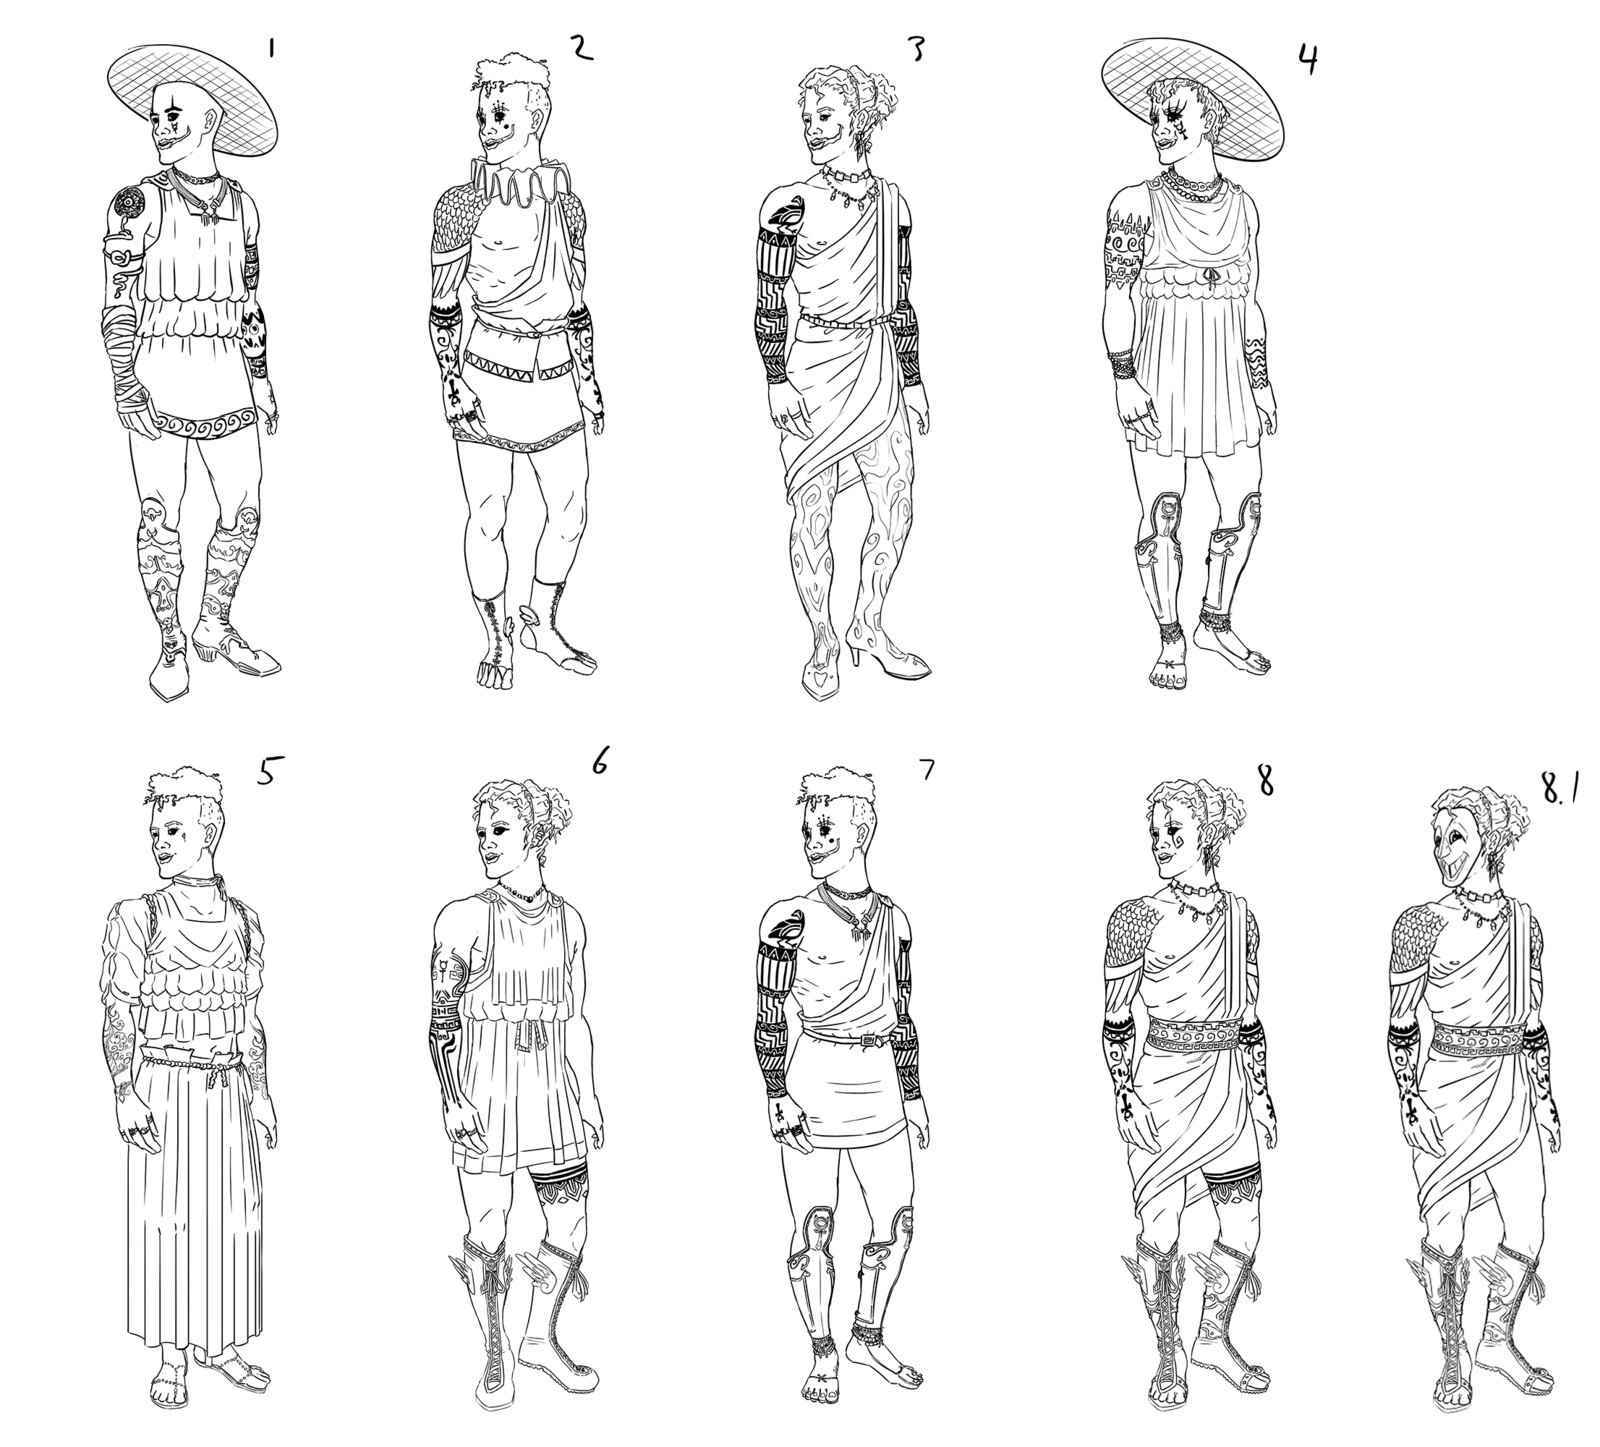 A variety of costumes that could work for Phaidros